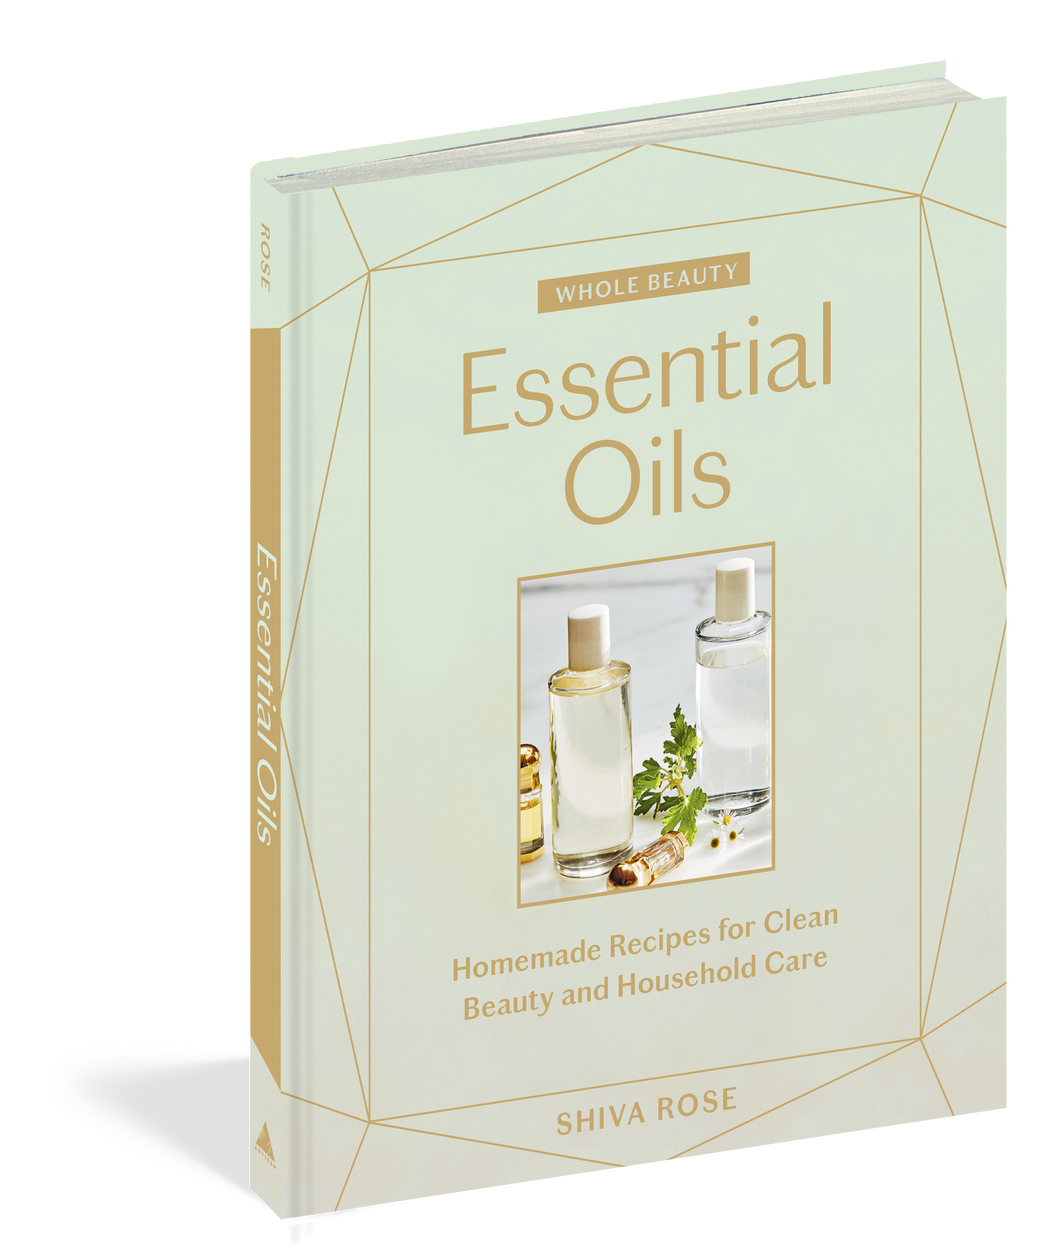 Whole Beauty: Essential Oils Homemade Recipes for Clean Beauty and Household Care By Shiva Rose